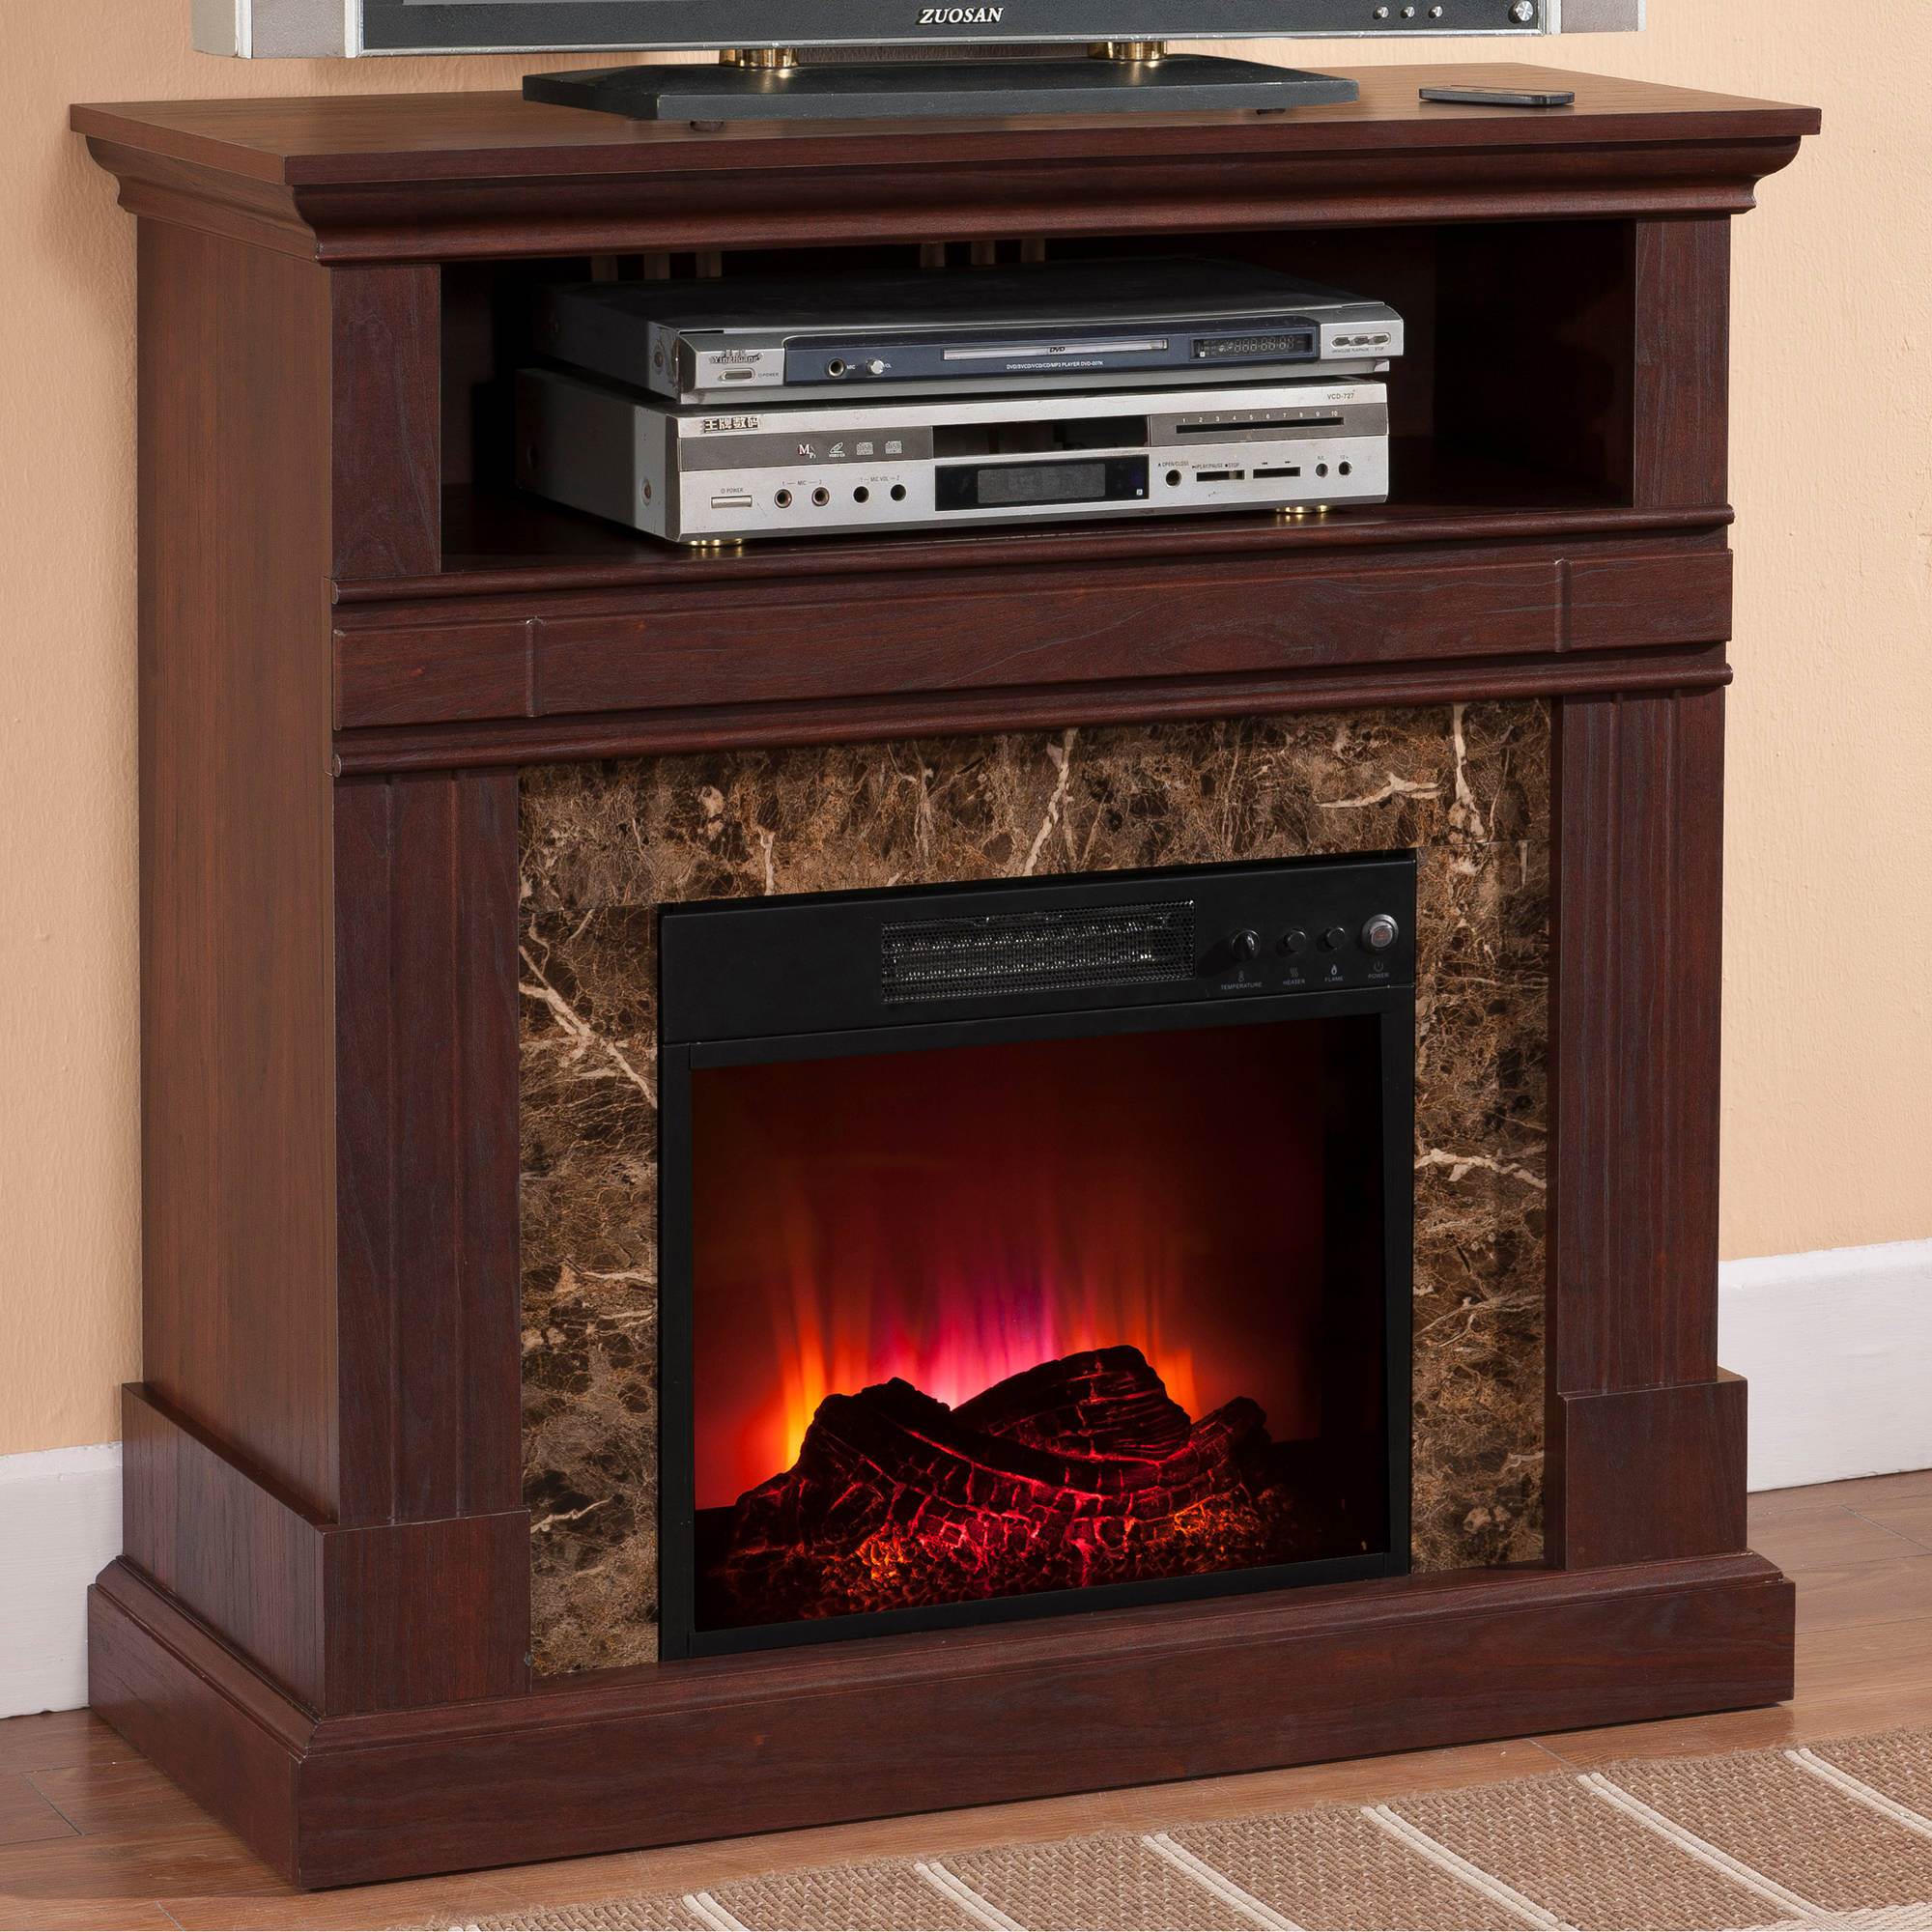 Fireplace Brick Cleaner Home Depot New White Electric Fireplace Tv Stand